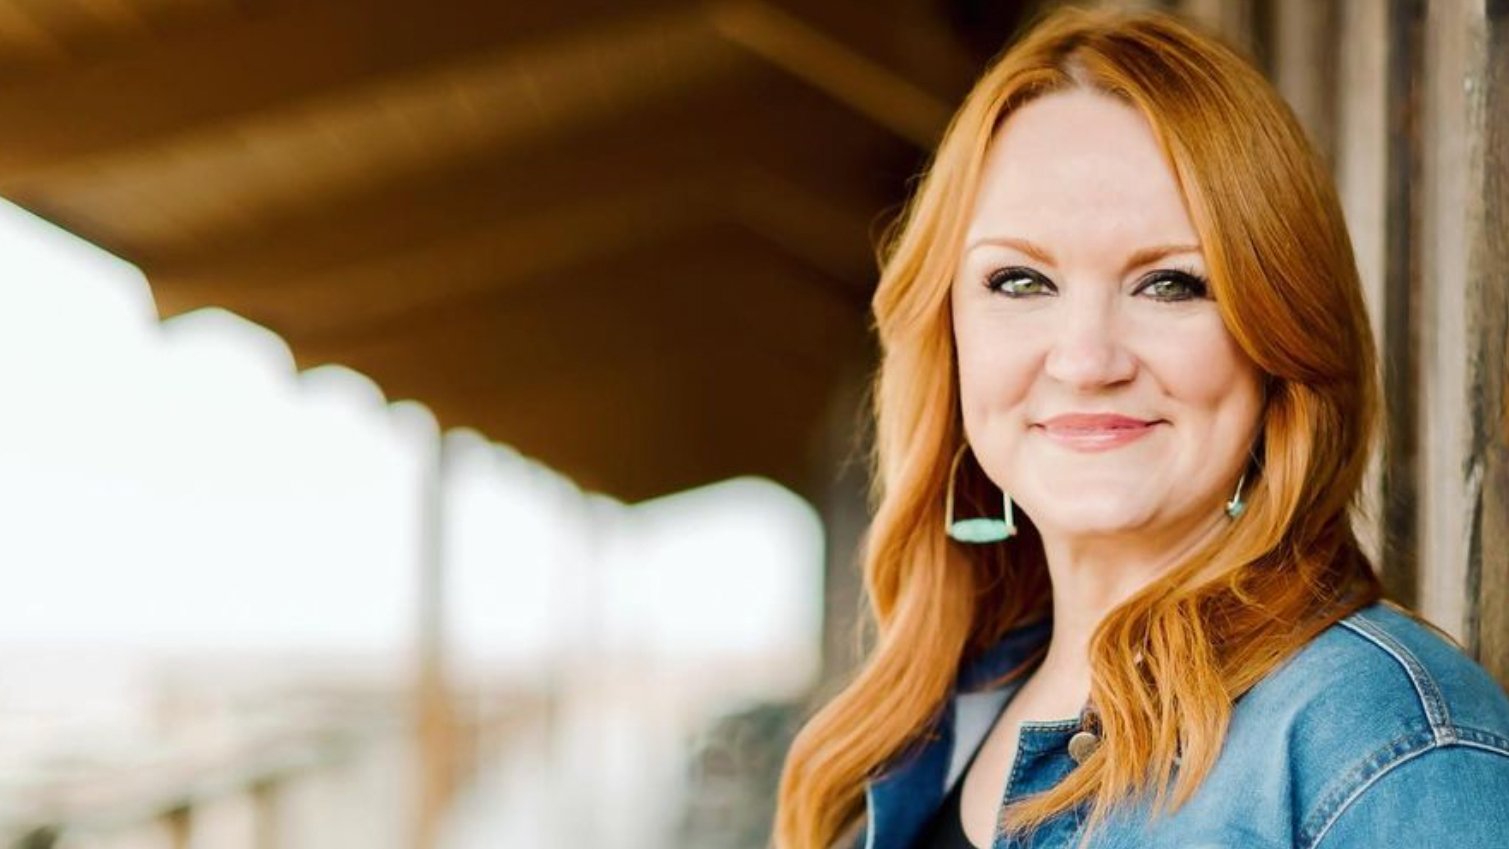 The Pioneer Woman - Ree Drummond - Giving away this purty, shiny